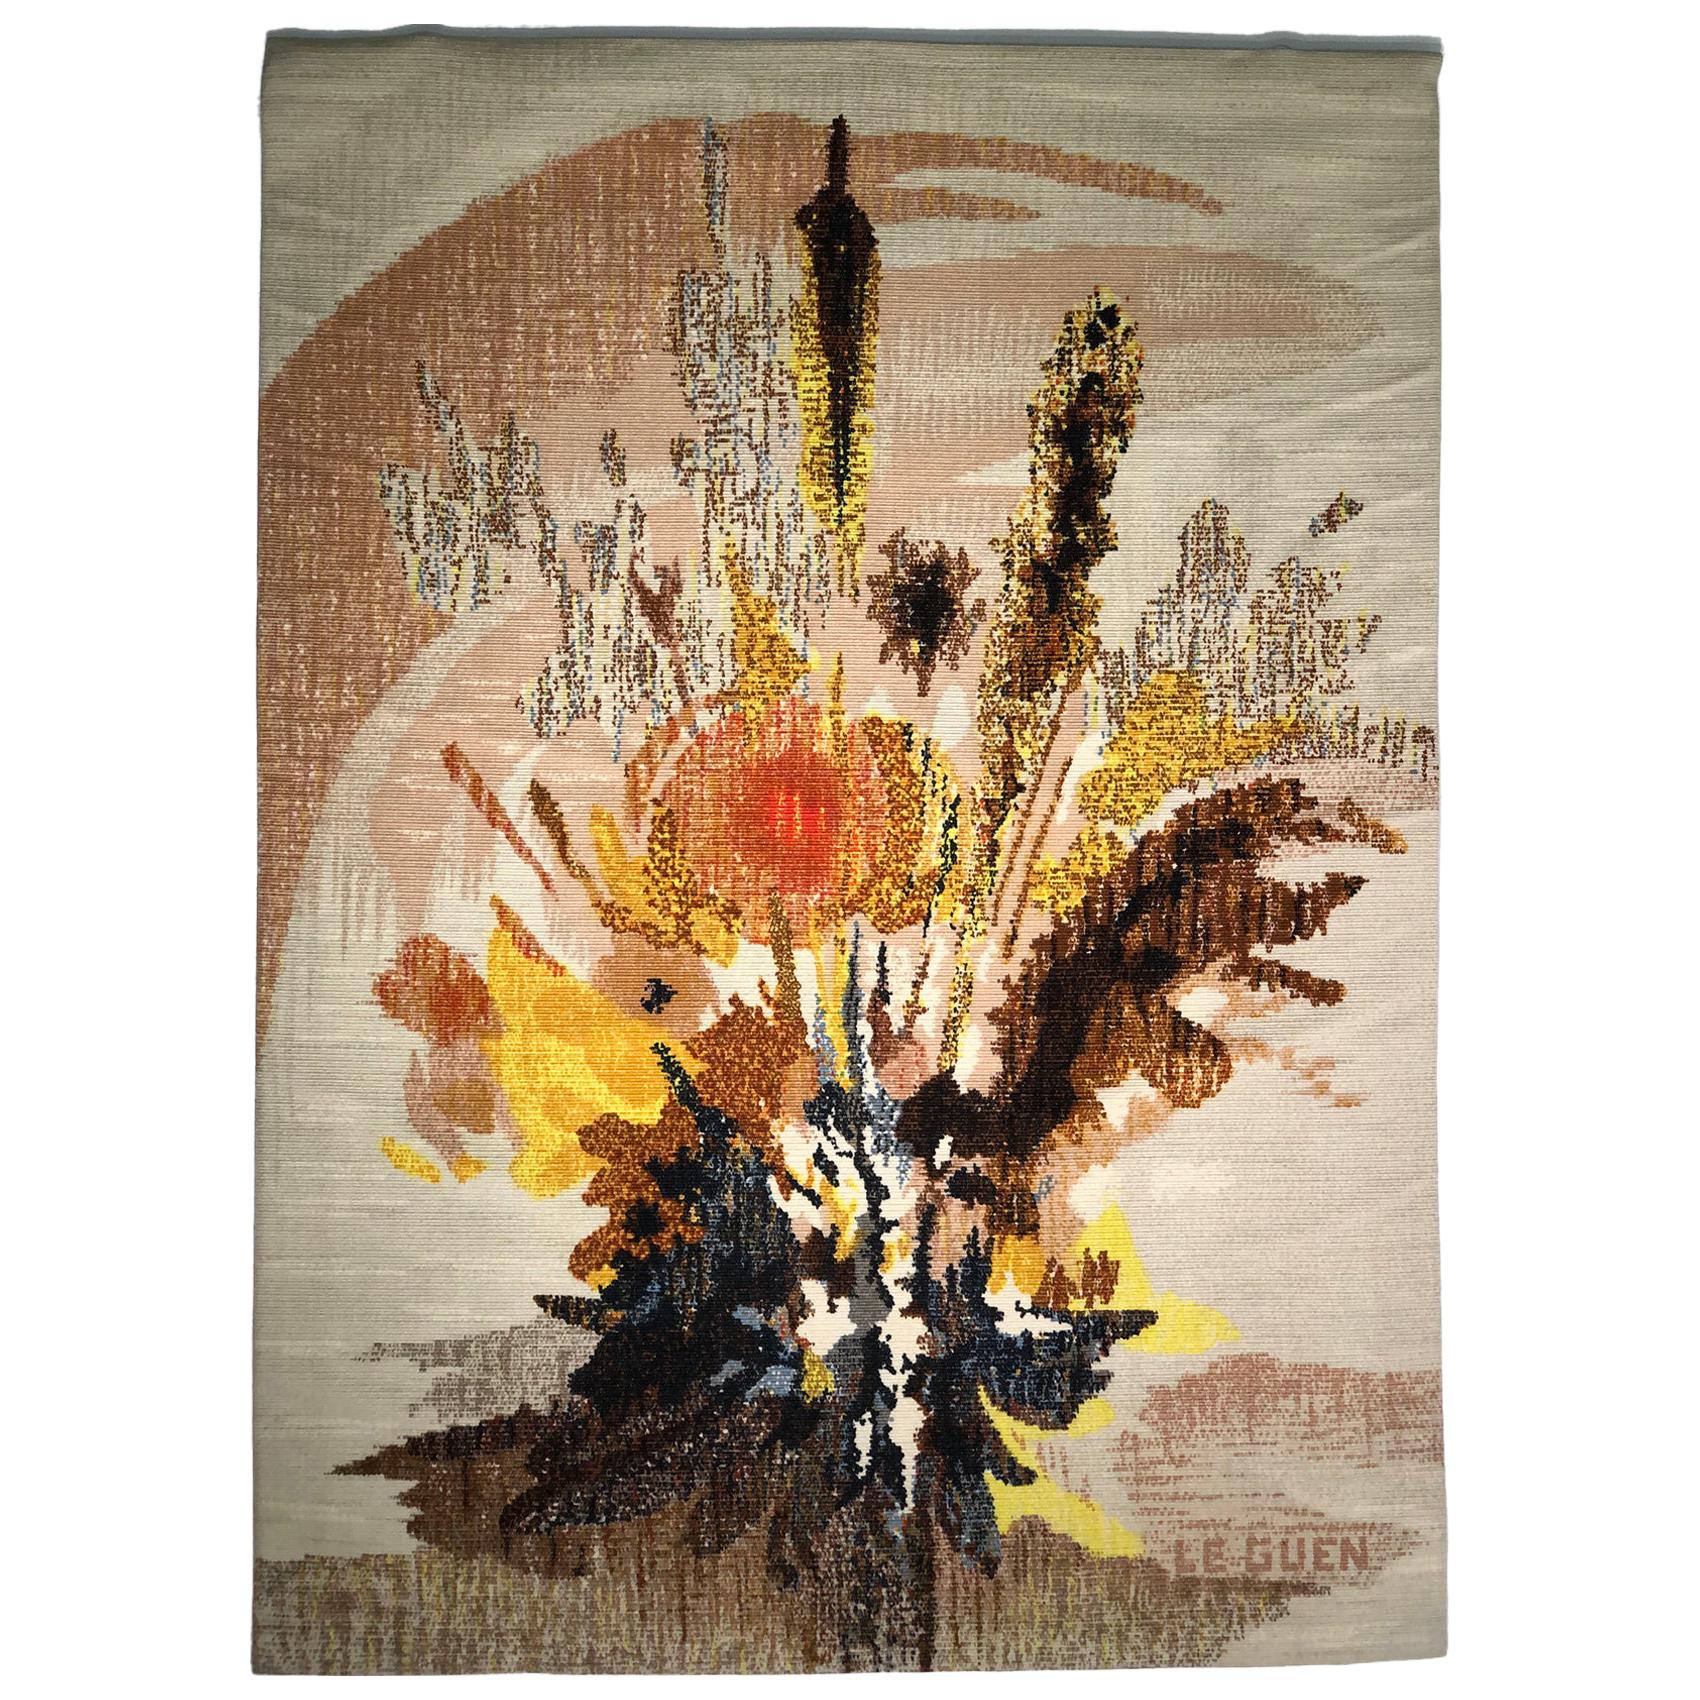 Robert Four, Aubusson Tapestry "Aube Fleurie" Signed by Le Guen, circa 1960